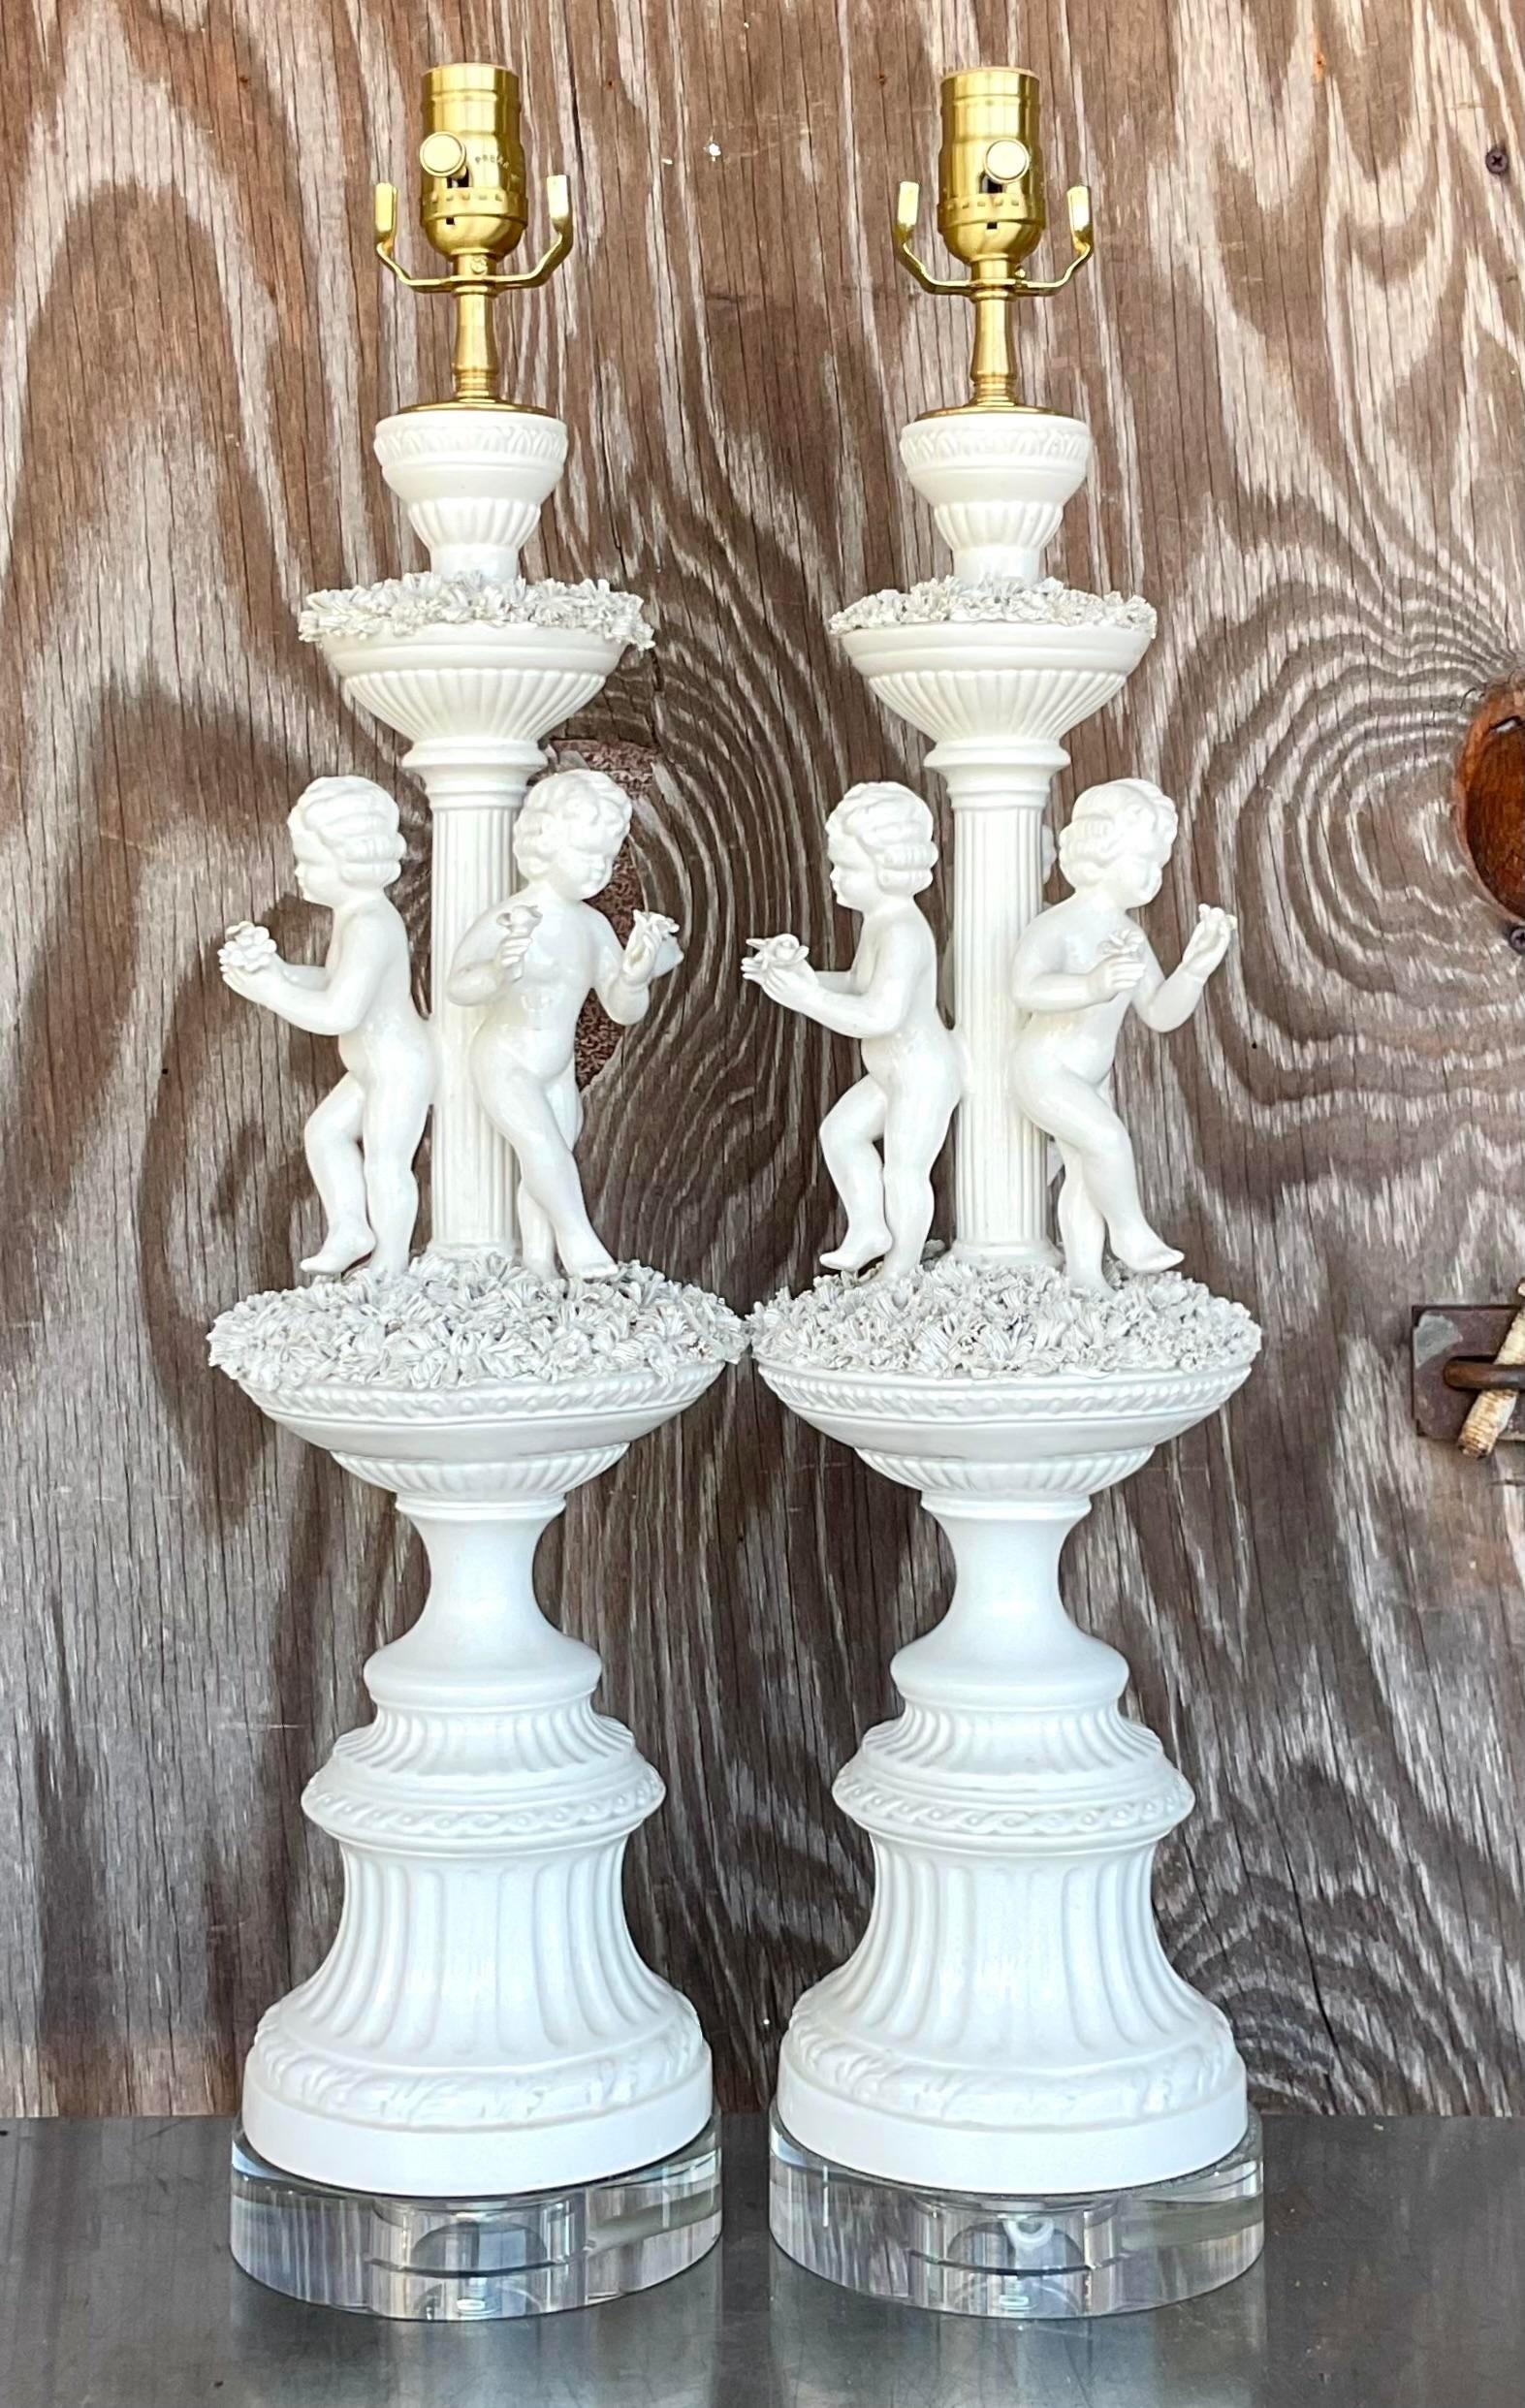 A fabulous pair of vintage Regency table lamps. Done in the manner of thr Putti style cherubs. A chic glazed ceramic finish with a bright white color. Fully restored with all new Wiring, hardware and lucite plinths. Acquired from a Palm Beach estate.